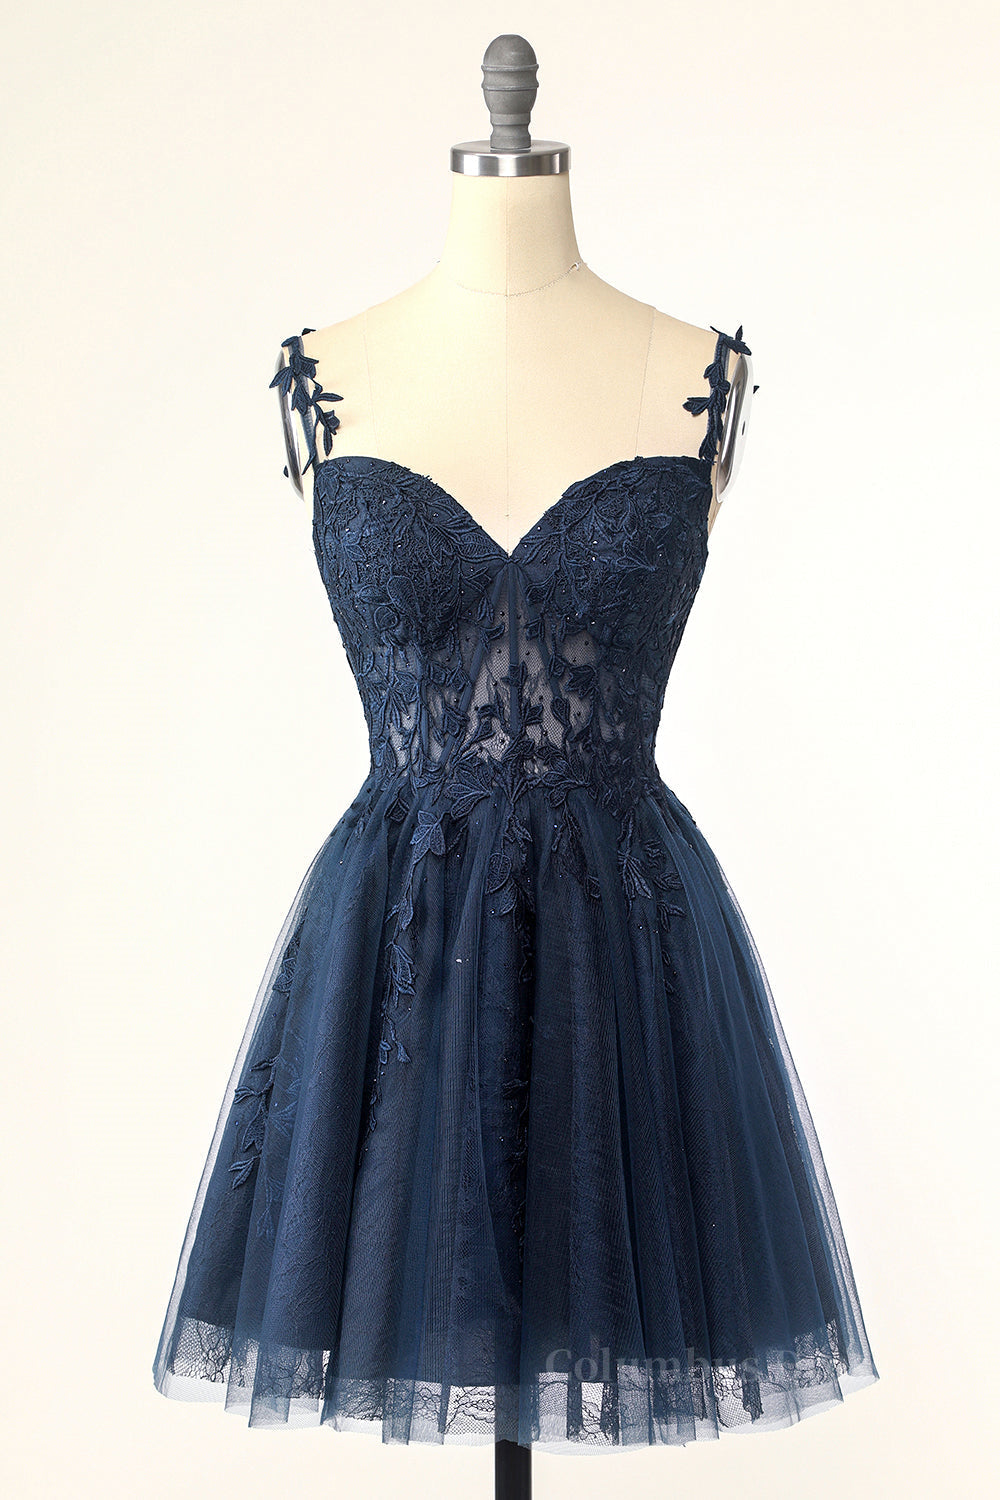 Navy Blue A-line Lace Appliques Short Corset Homecoming Dress outfit, Country Wedding Dress